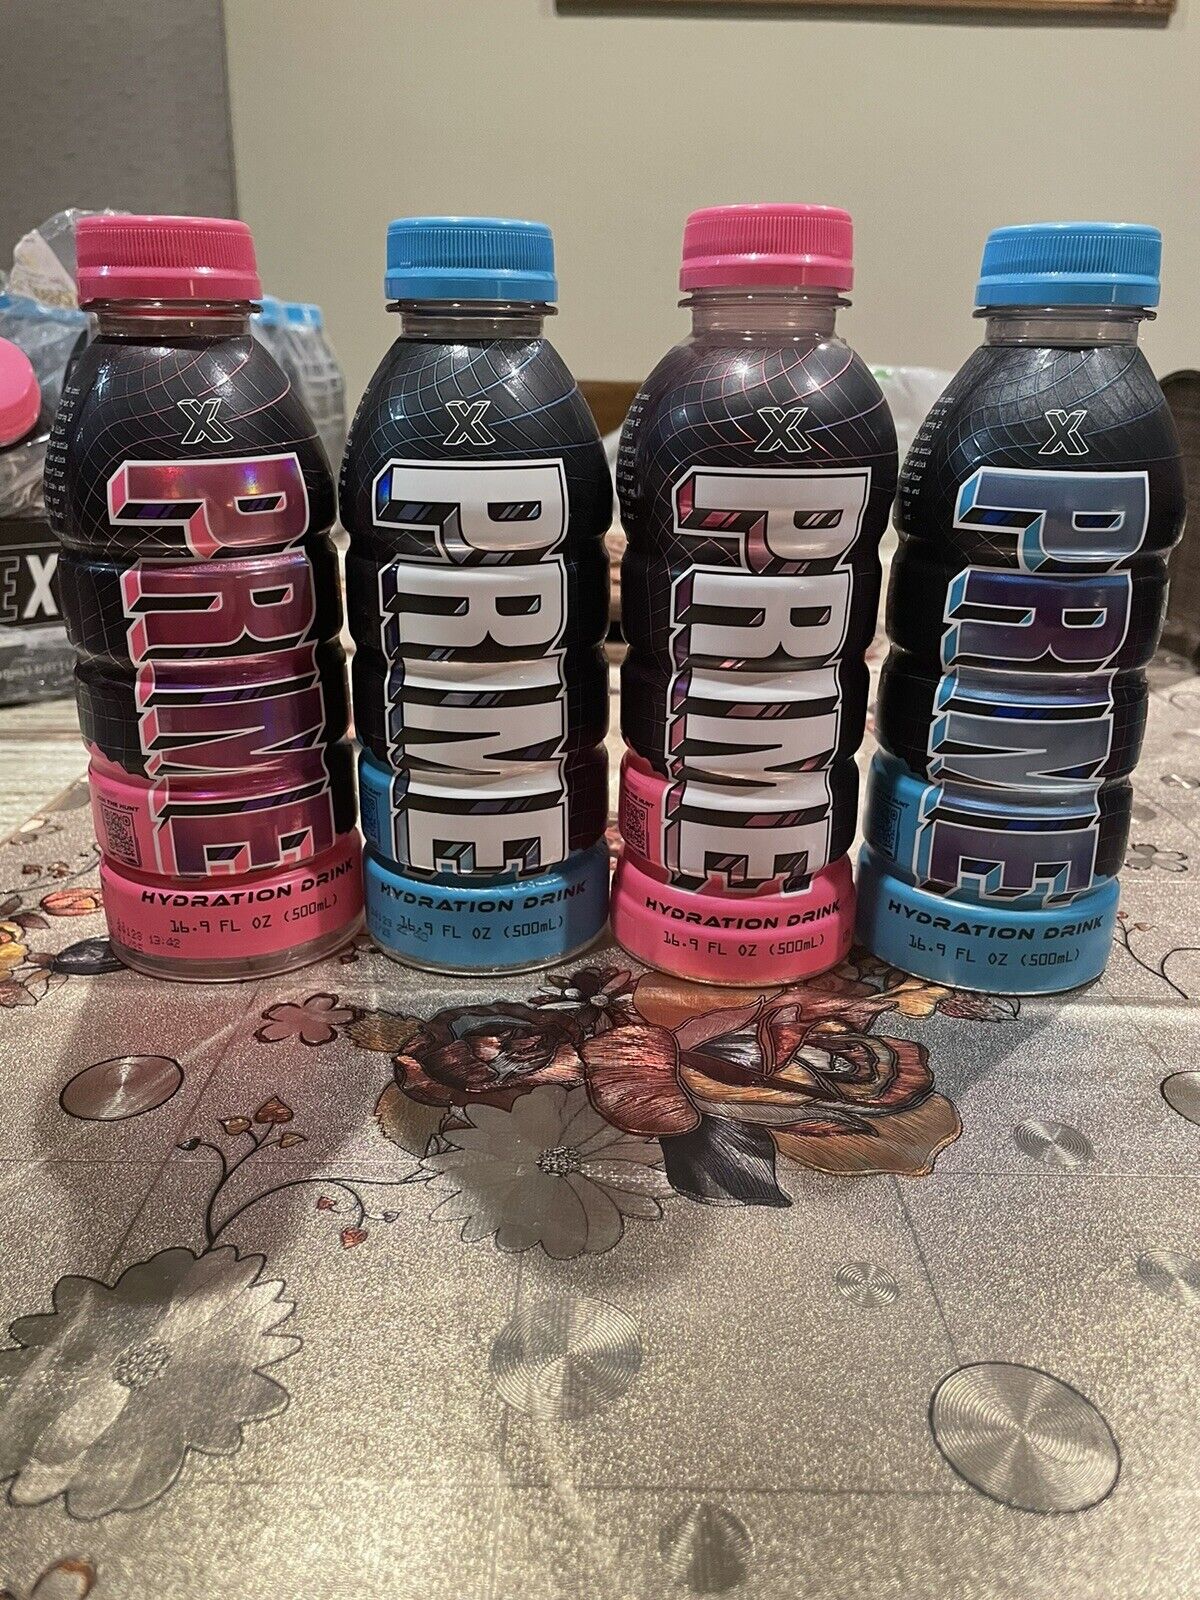 NEW Prime X Hydration Drink Pink & Blue Holographic RARE 2 PK - 1 Blue + 1 Pink